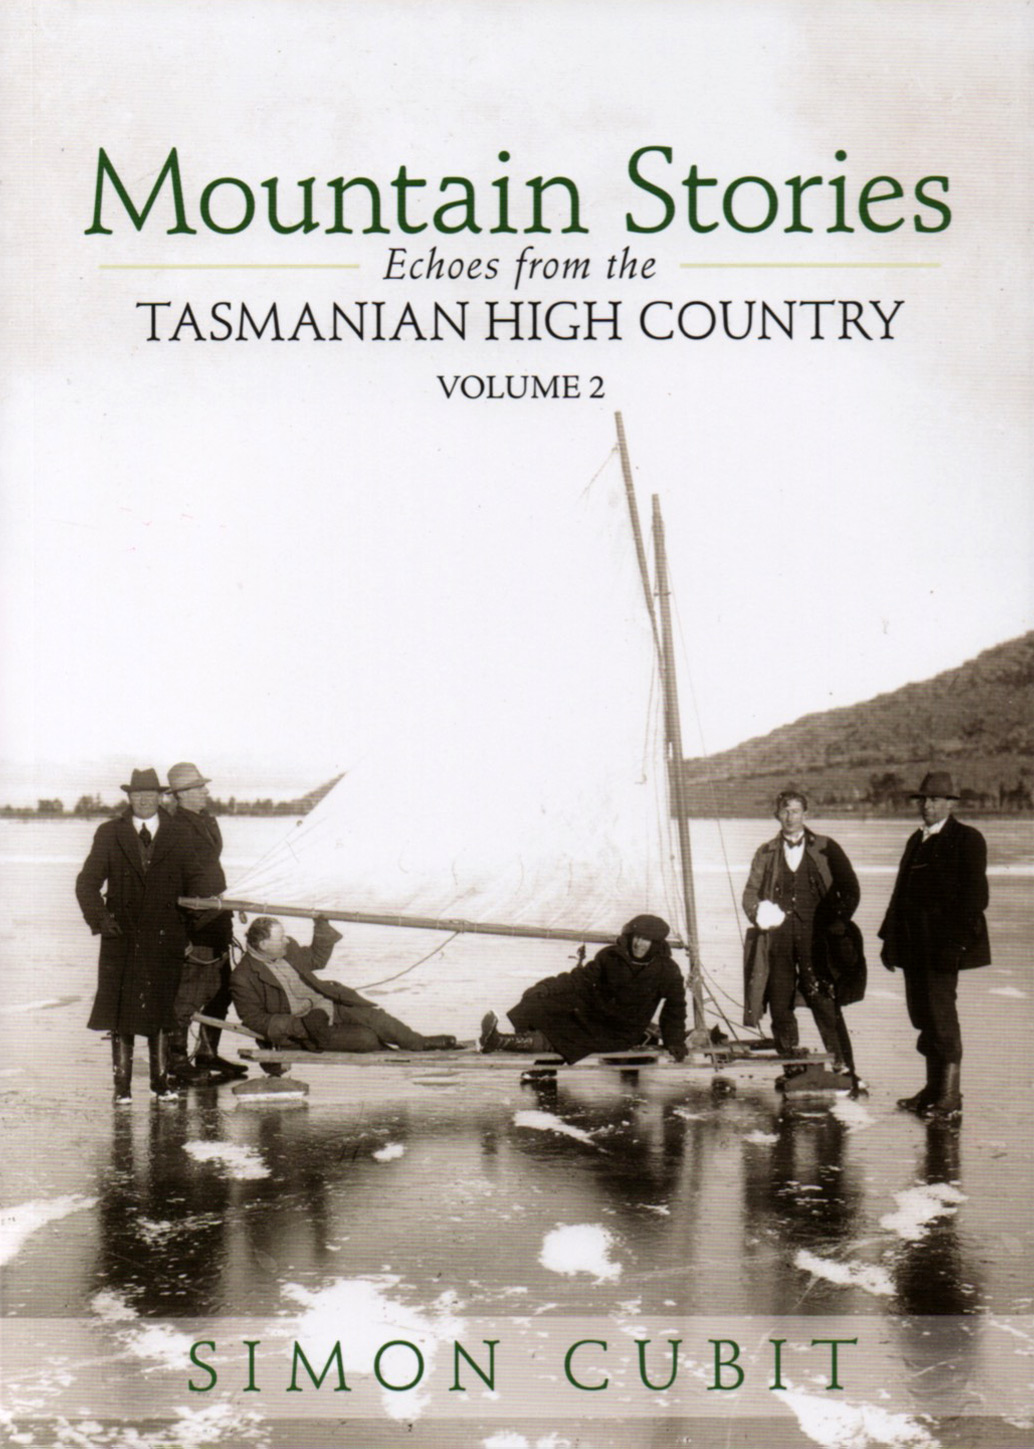 Mountain Stories - Echoes from the Tasmanian High Country Volume 2